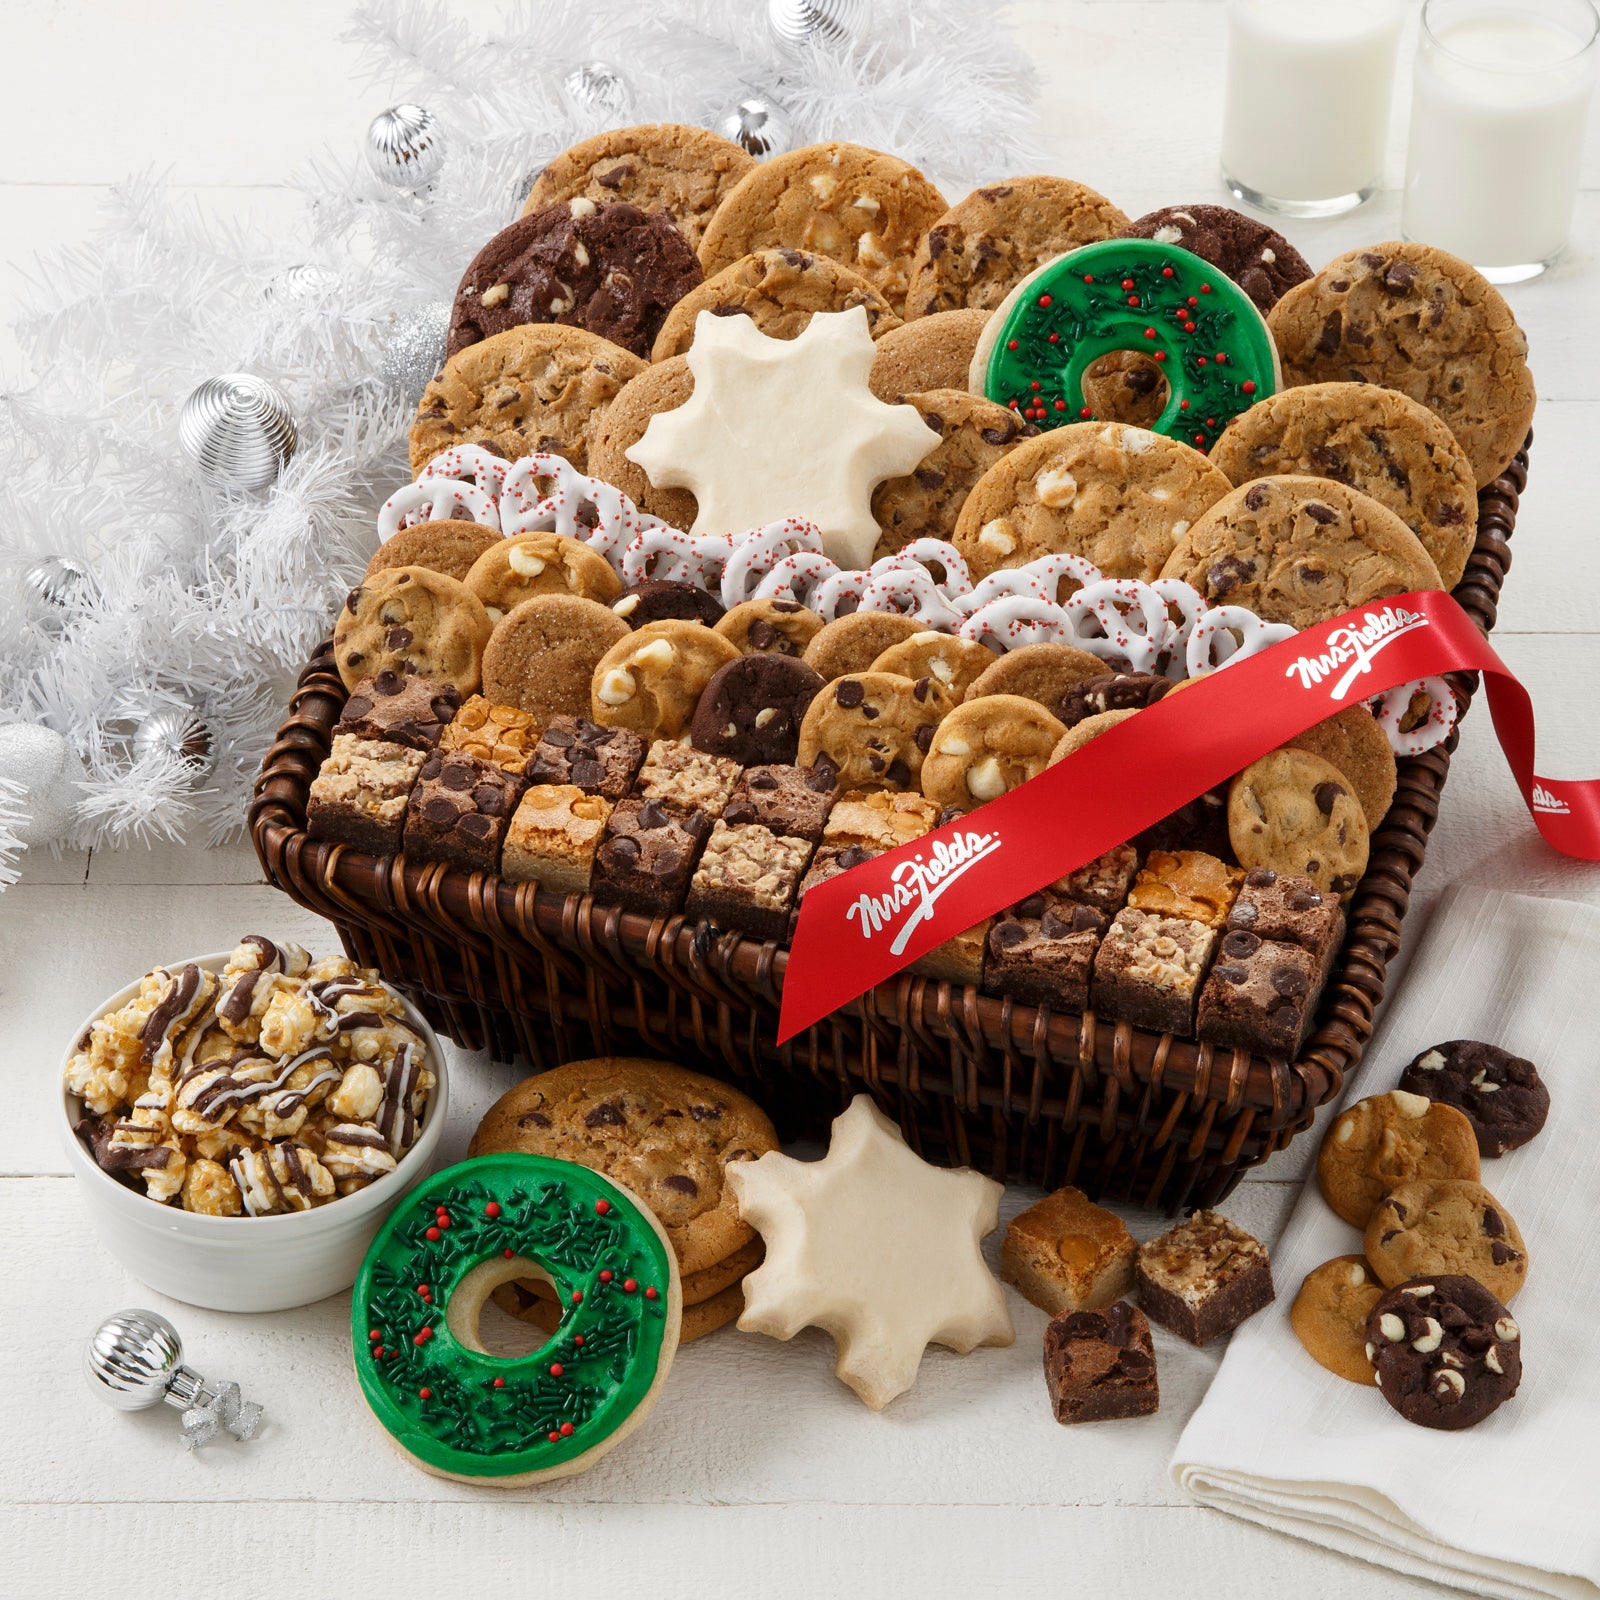 A brown basket filled with an assortment of original cookies, Nibblers®, brownie bites, yogurt-covered pretzels, two frosted snowflake cookies, two frosted wreath cookies with sprinkles, and chocolate drizzled popcorn and decorated with a red Mrs. Fields' ribbon.